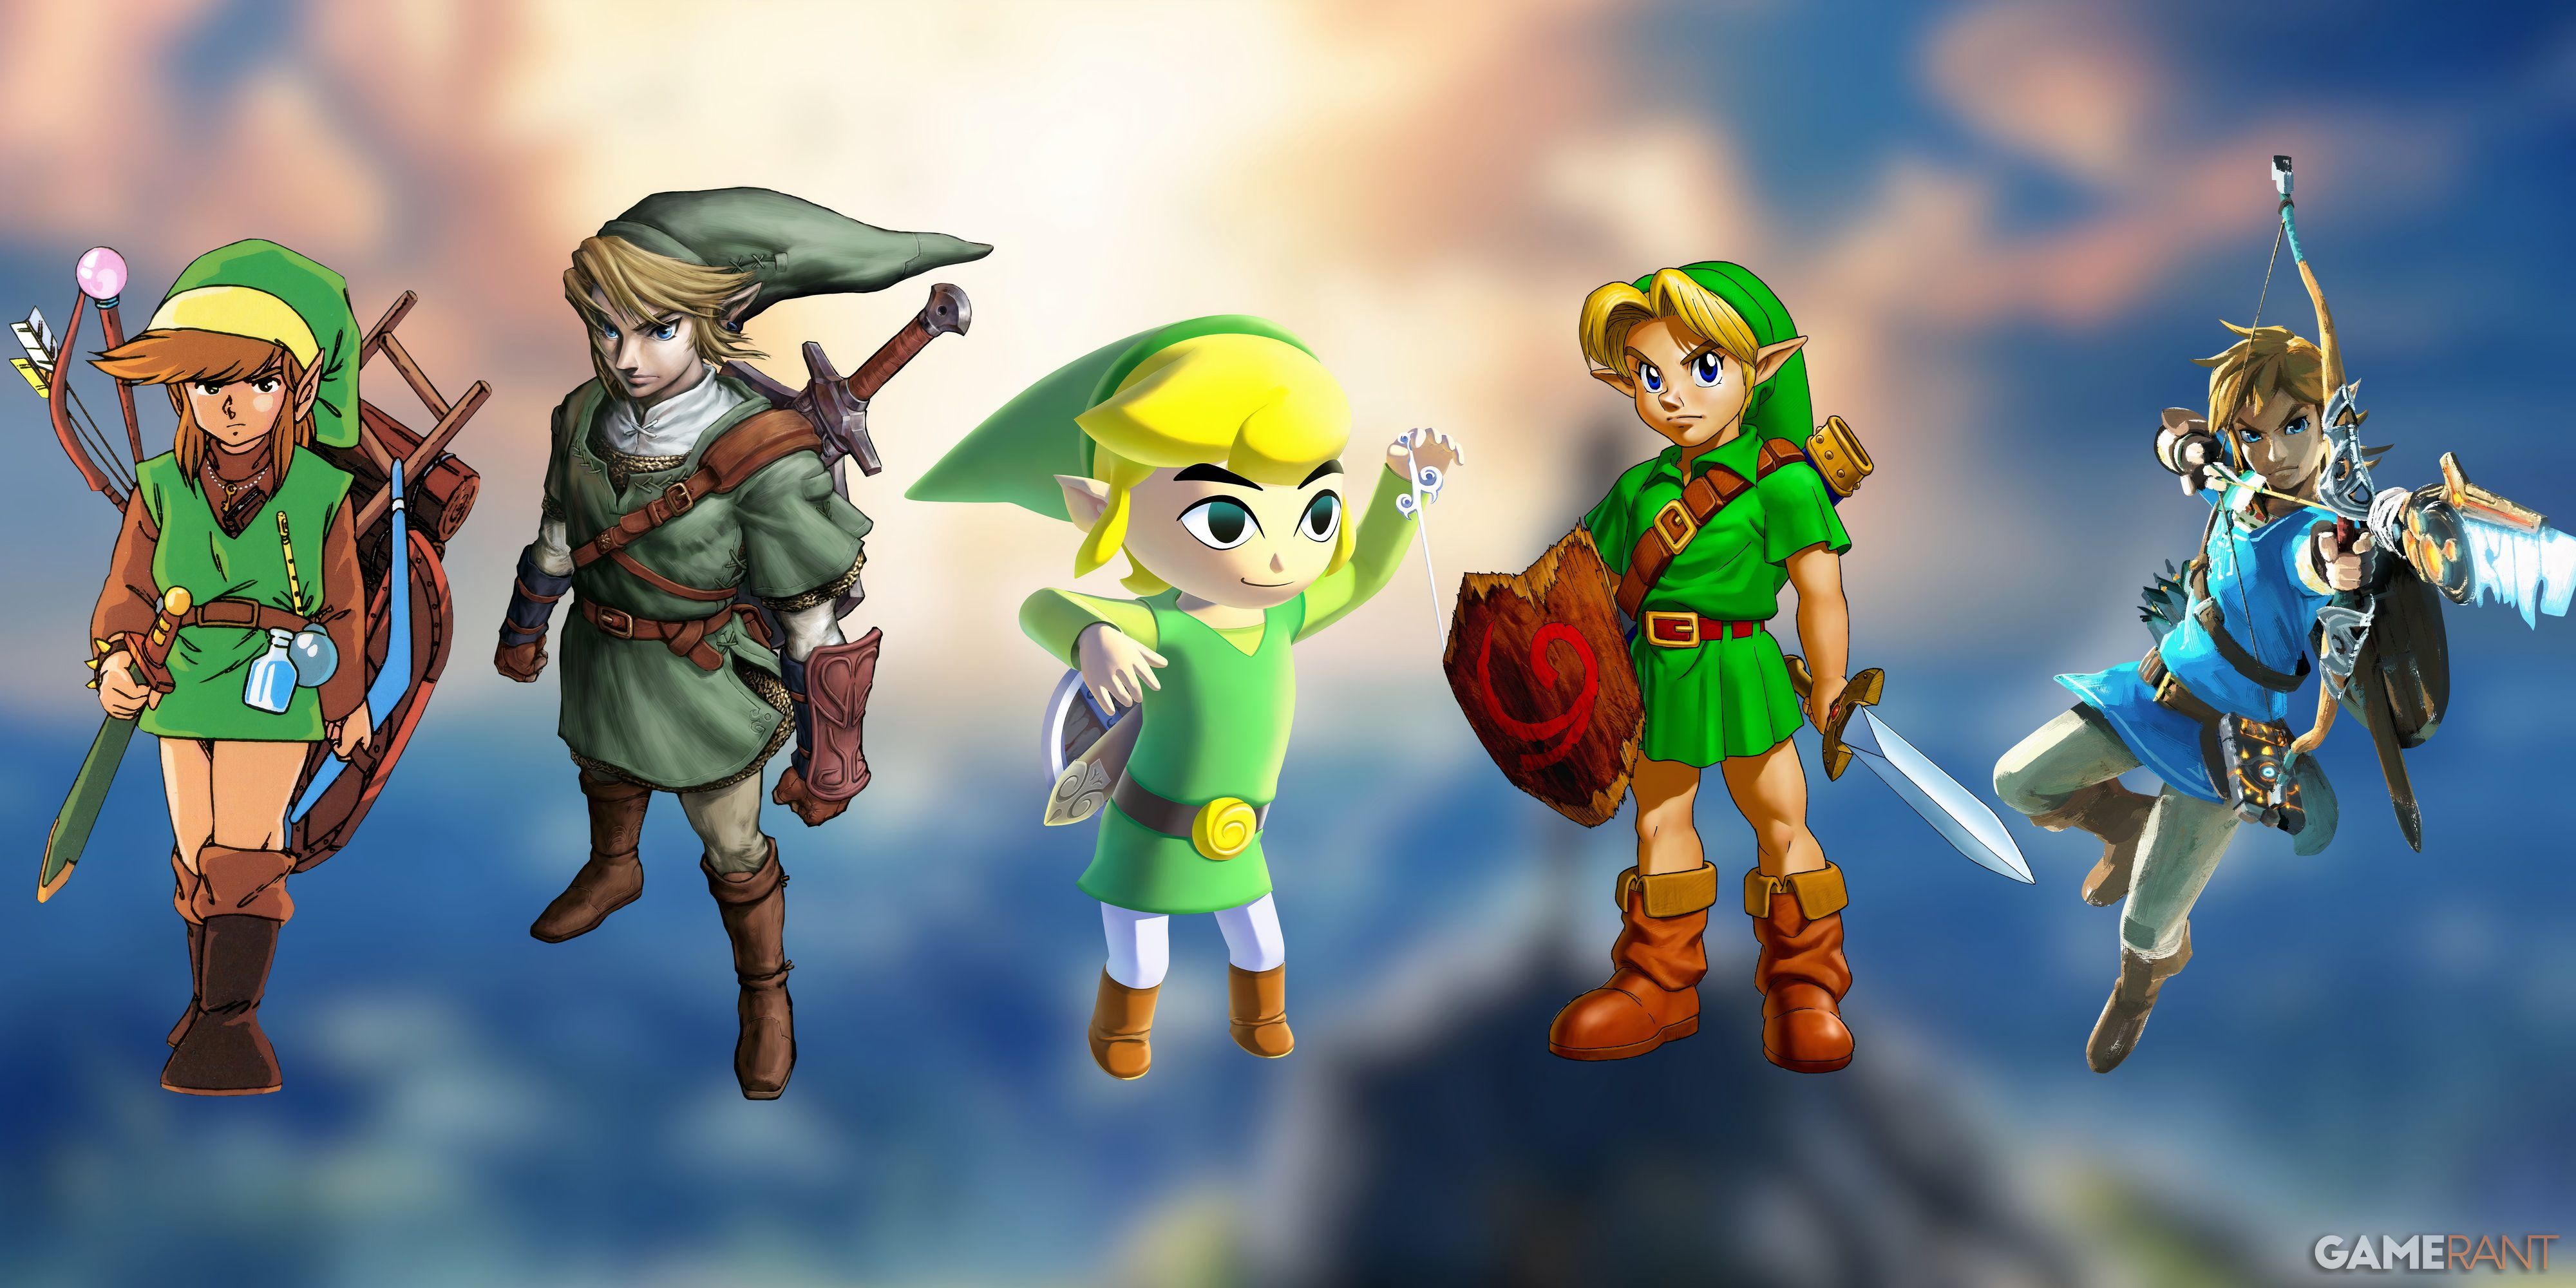 Different Versions of Link